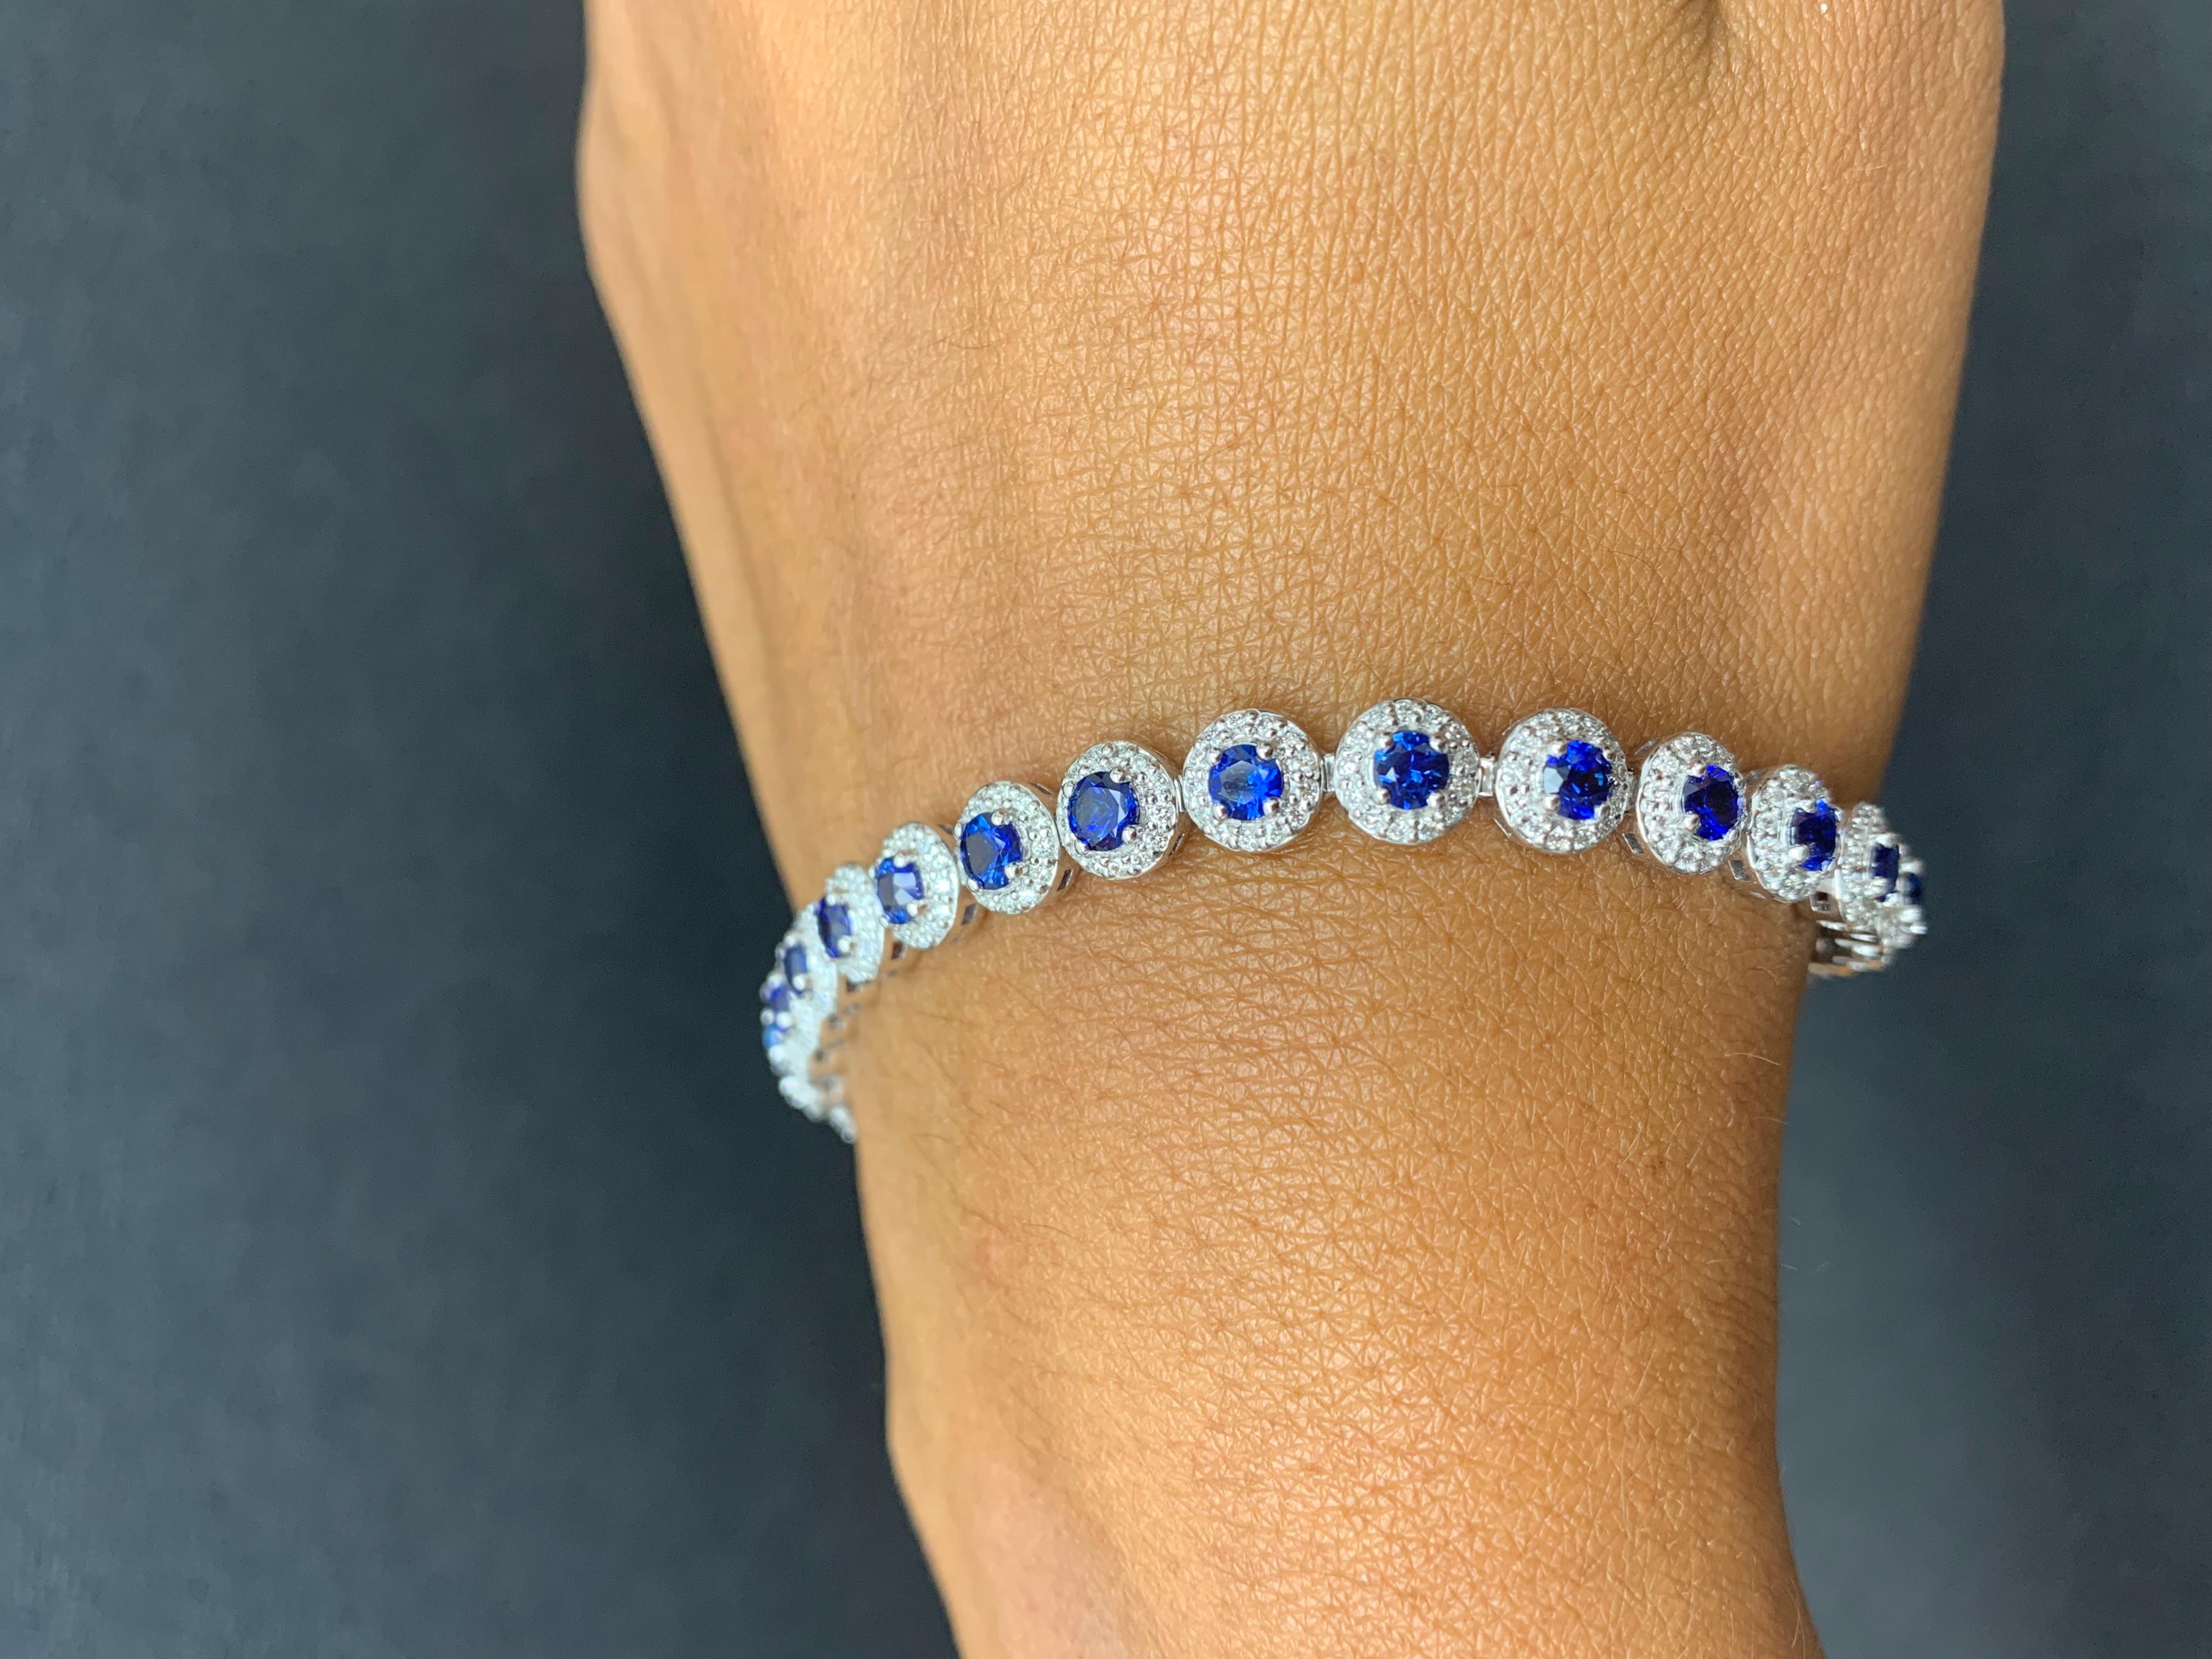 4.40 Carat Round Cut Sapphire and Diamond Tennis Bracelet in 14K White Gold For Sale 4